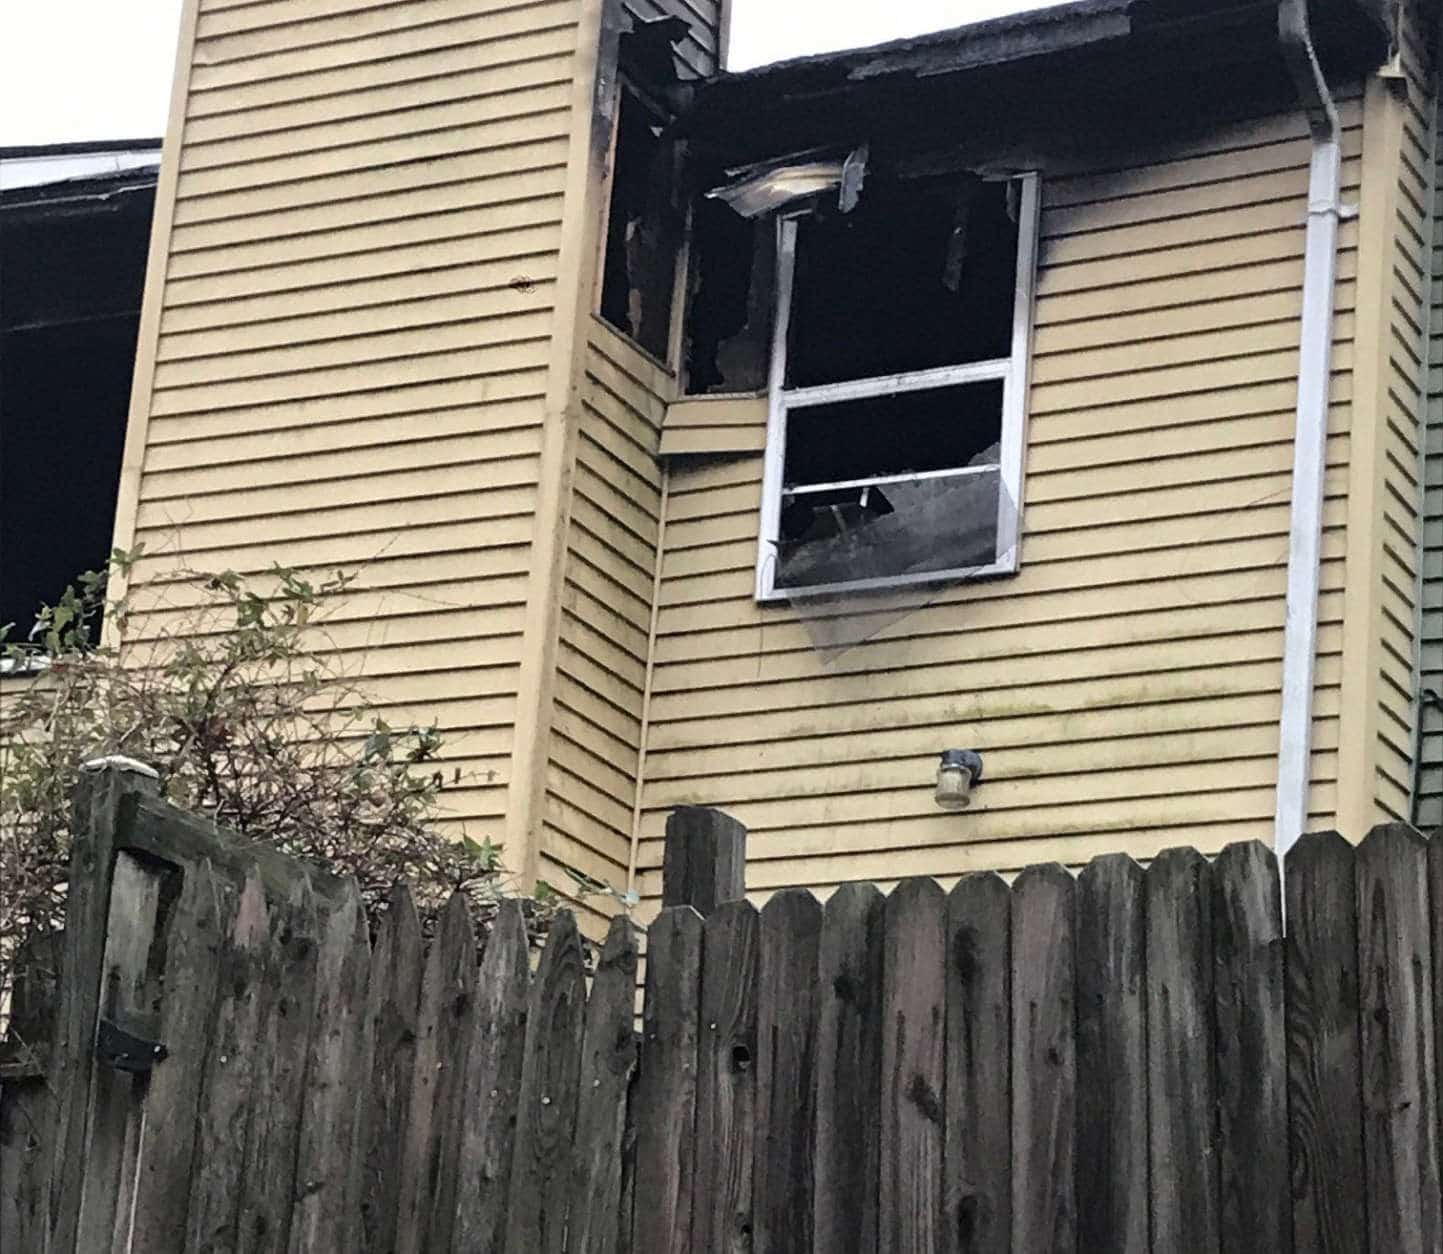 When firefighters arrived on the scene, the fire was visible from the rear of the house. They found the victim, 84-year-old Doris Miller, on the second floor with severe burns. She died from her wound shortly after arriving at the hospital. (WTOP/Kyle Cooper)